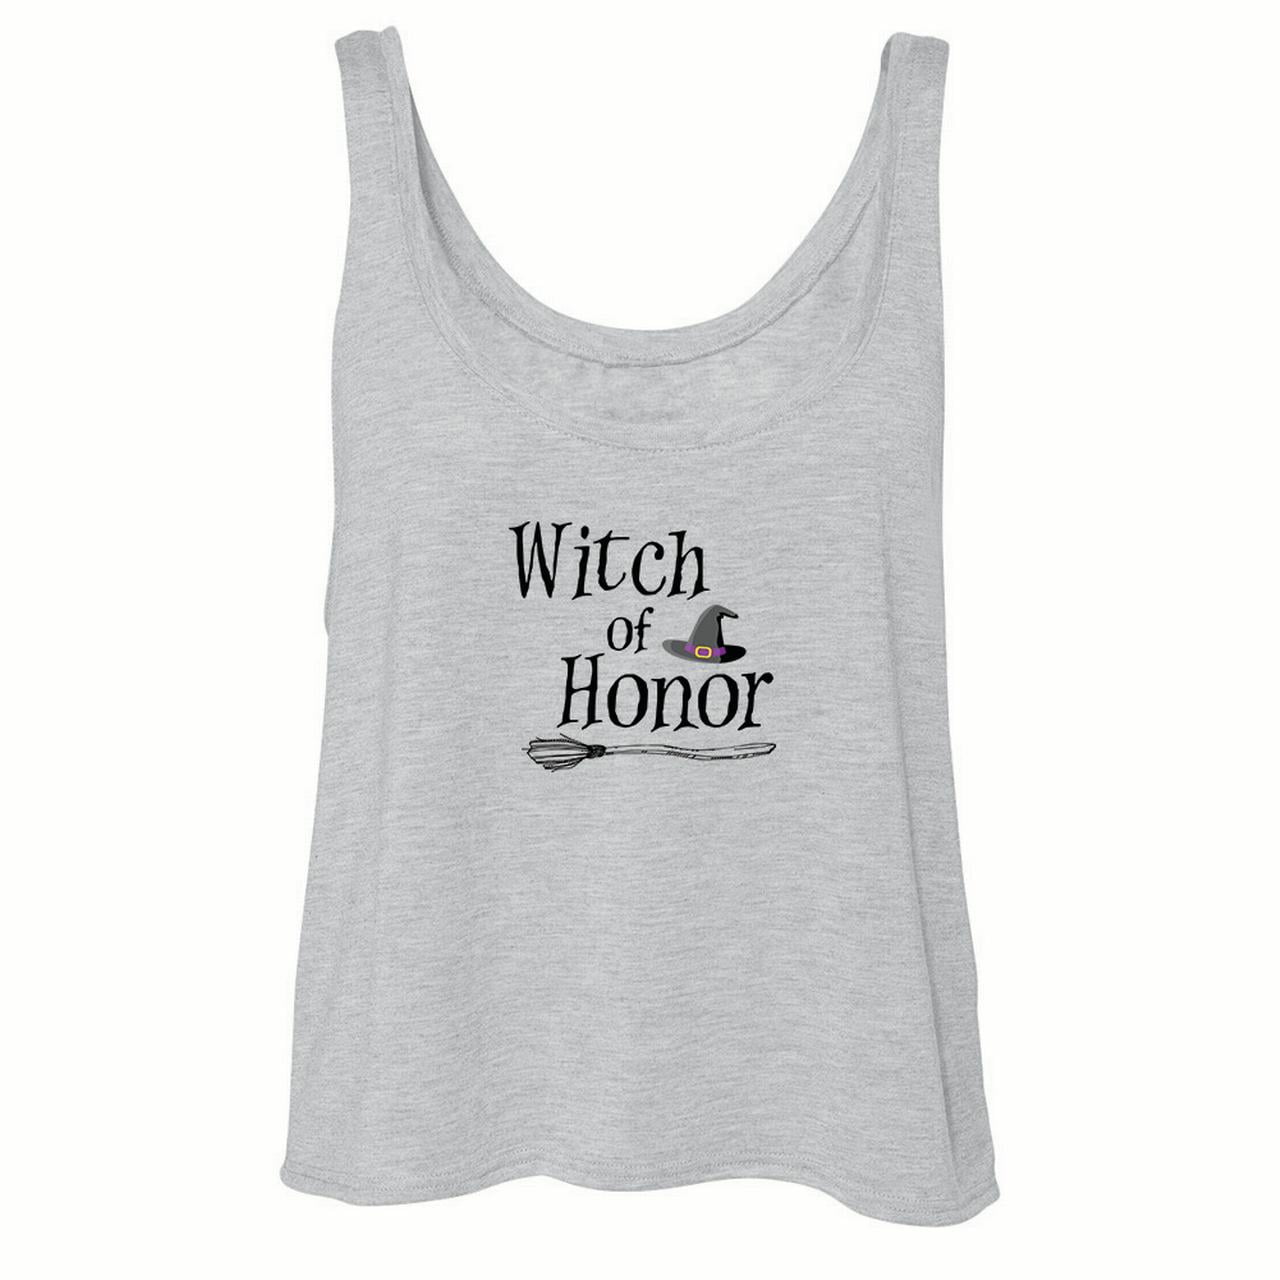 graphic tank women's tank top witch tank top If the broom fits